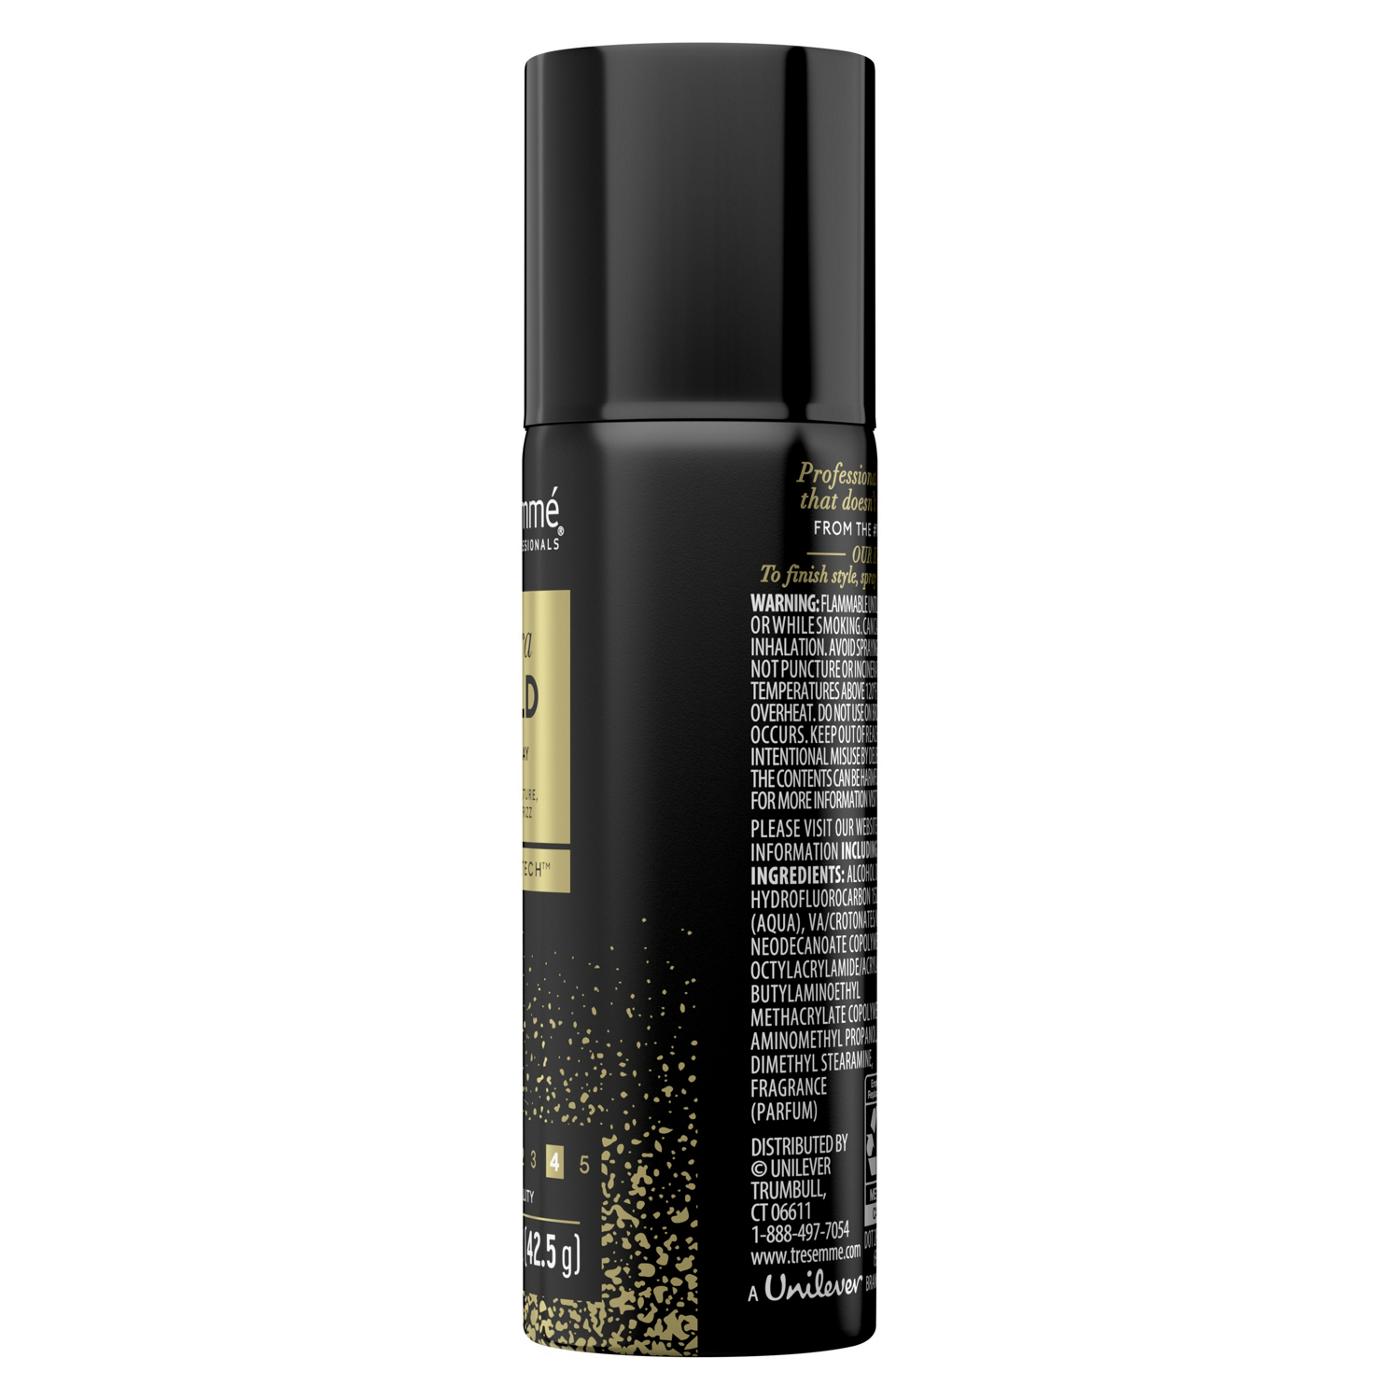 TRESemmé Travel Size TRES Two Extra Hold Hair Spray; image 5 of 7